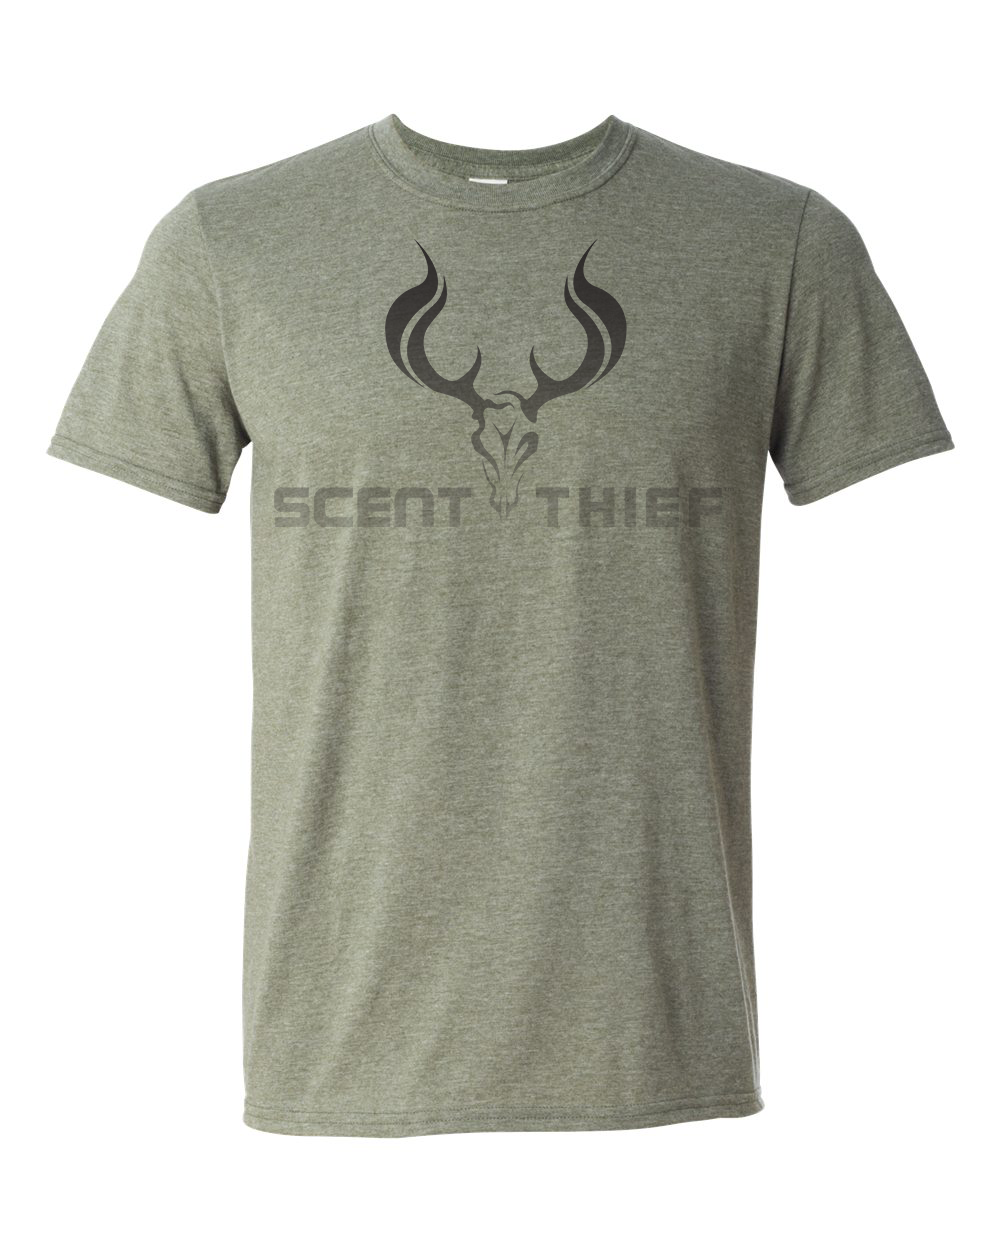 Scent Thief Heather Military Green T-Shirt